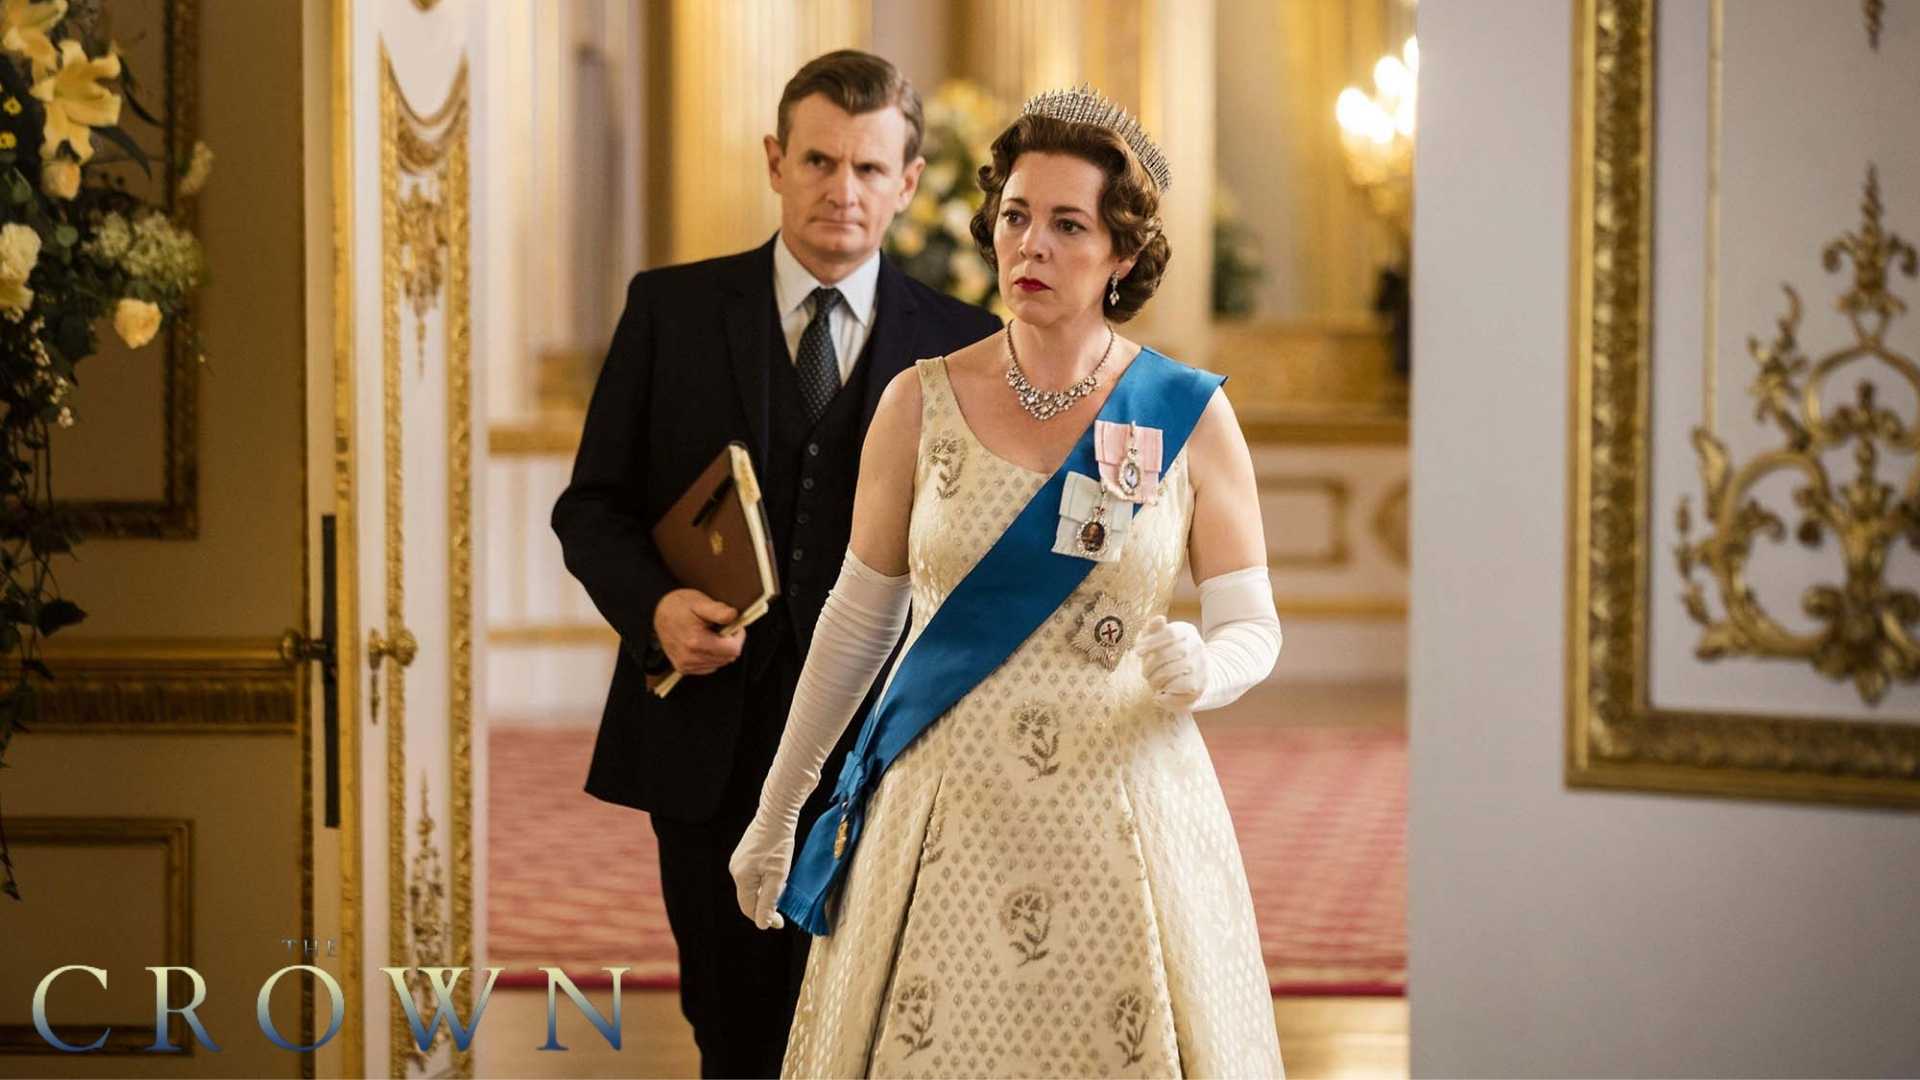 The Crown Season 5: Refresh in Cast and Release Date